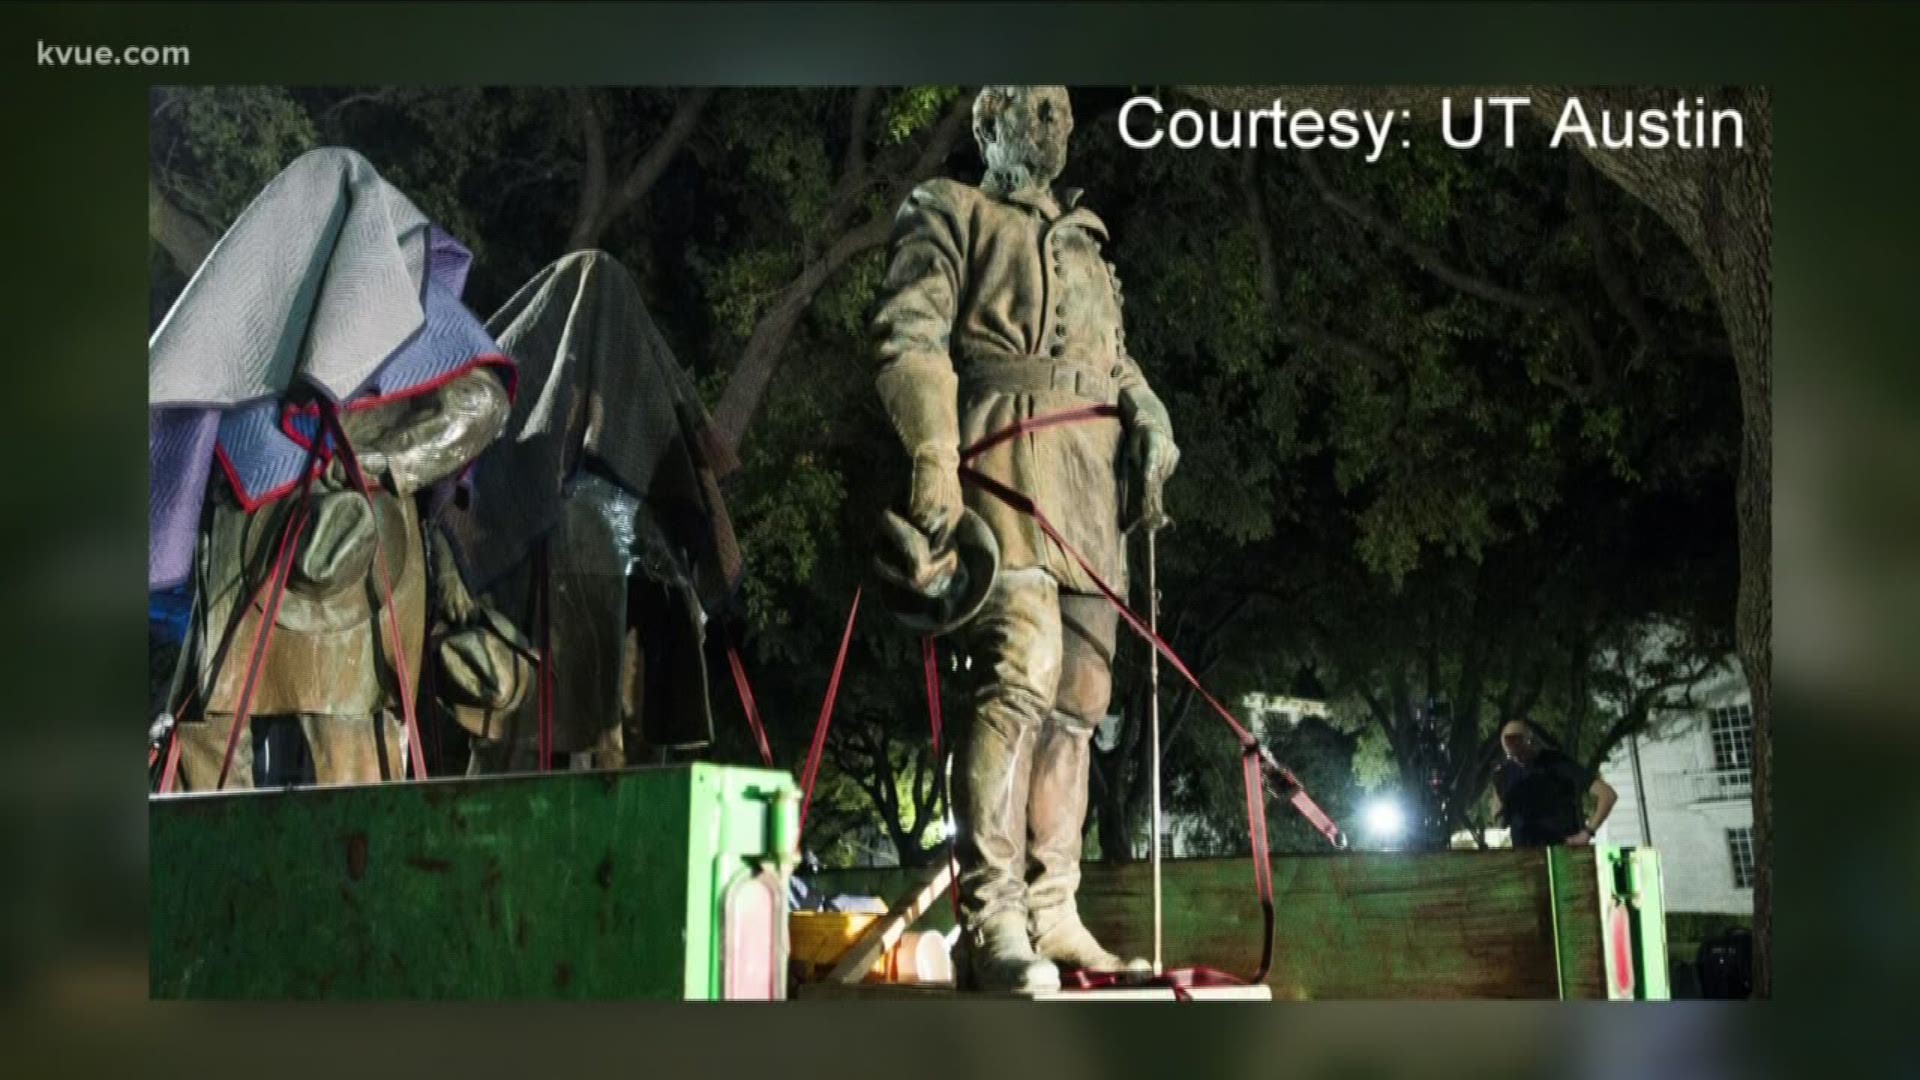 Two years after the UT Austin removed several confederate statues on campus, the battle is still ongoing.